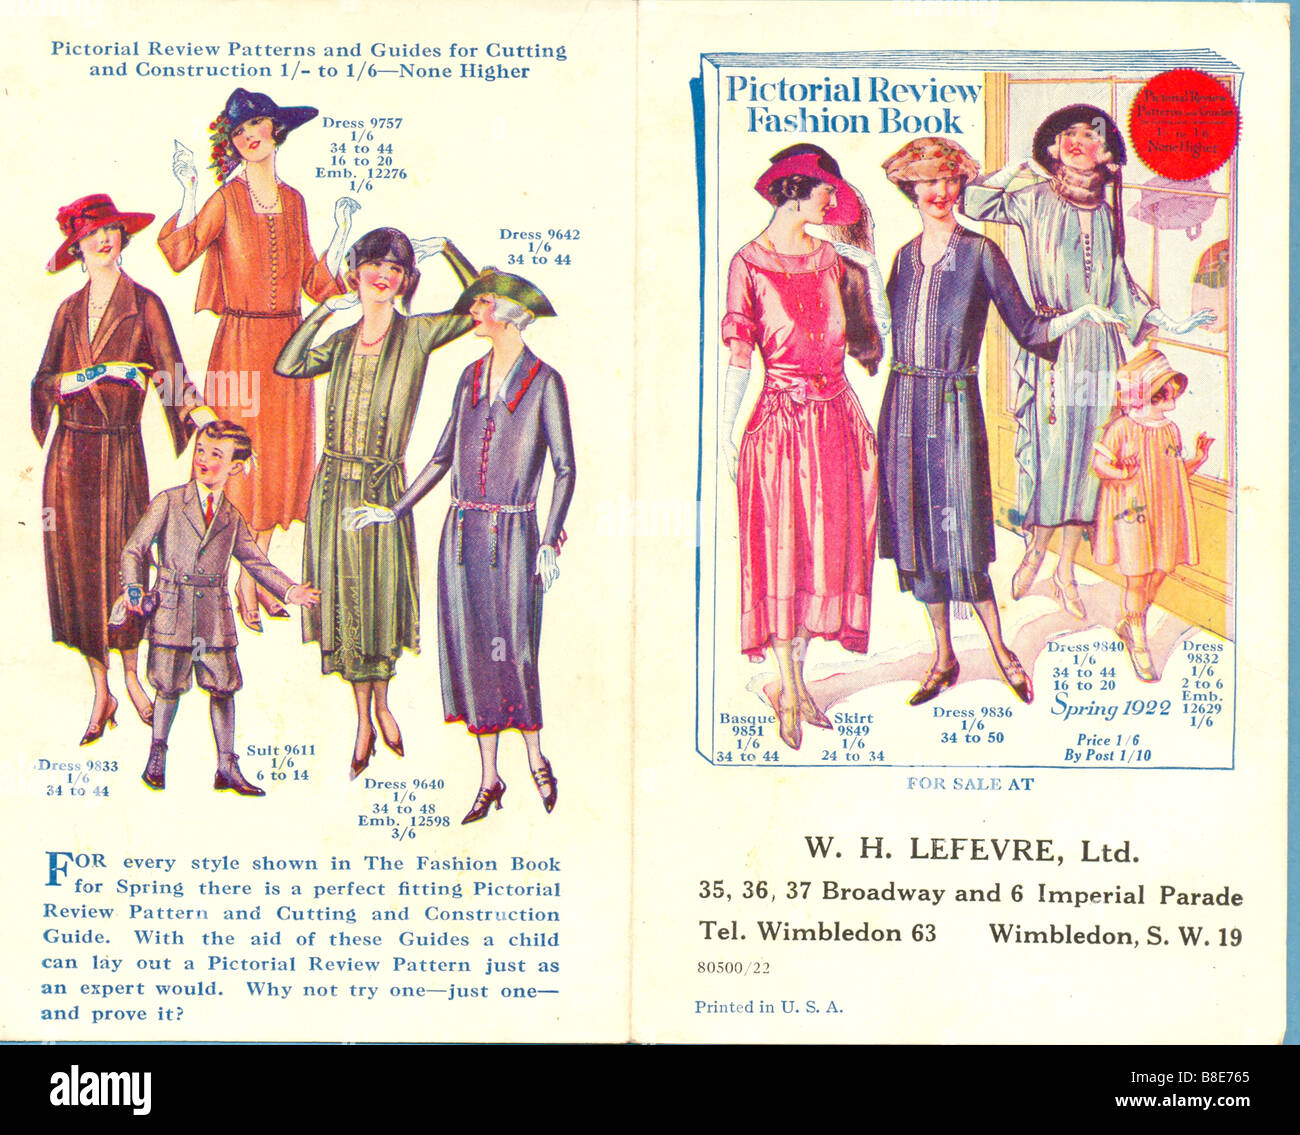 Patterns for Spring 1922 published by W H Lefevre Stock Photo